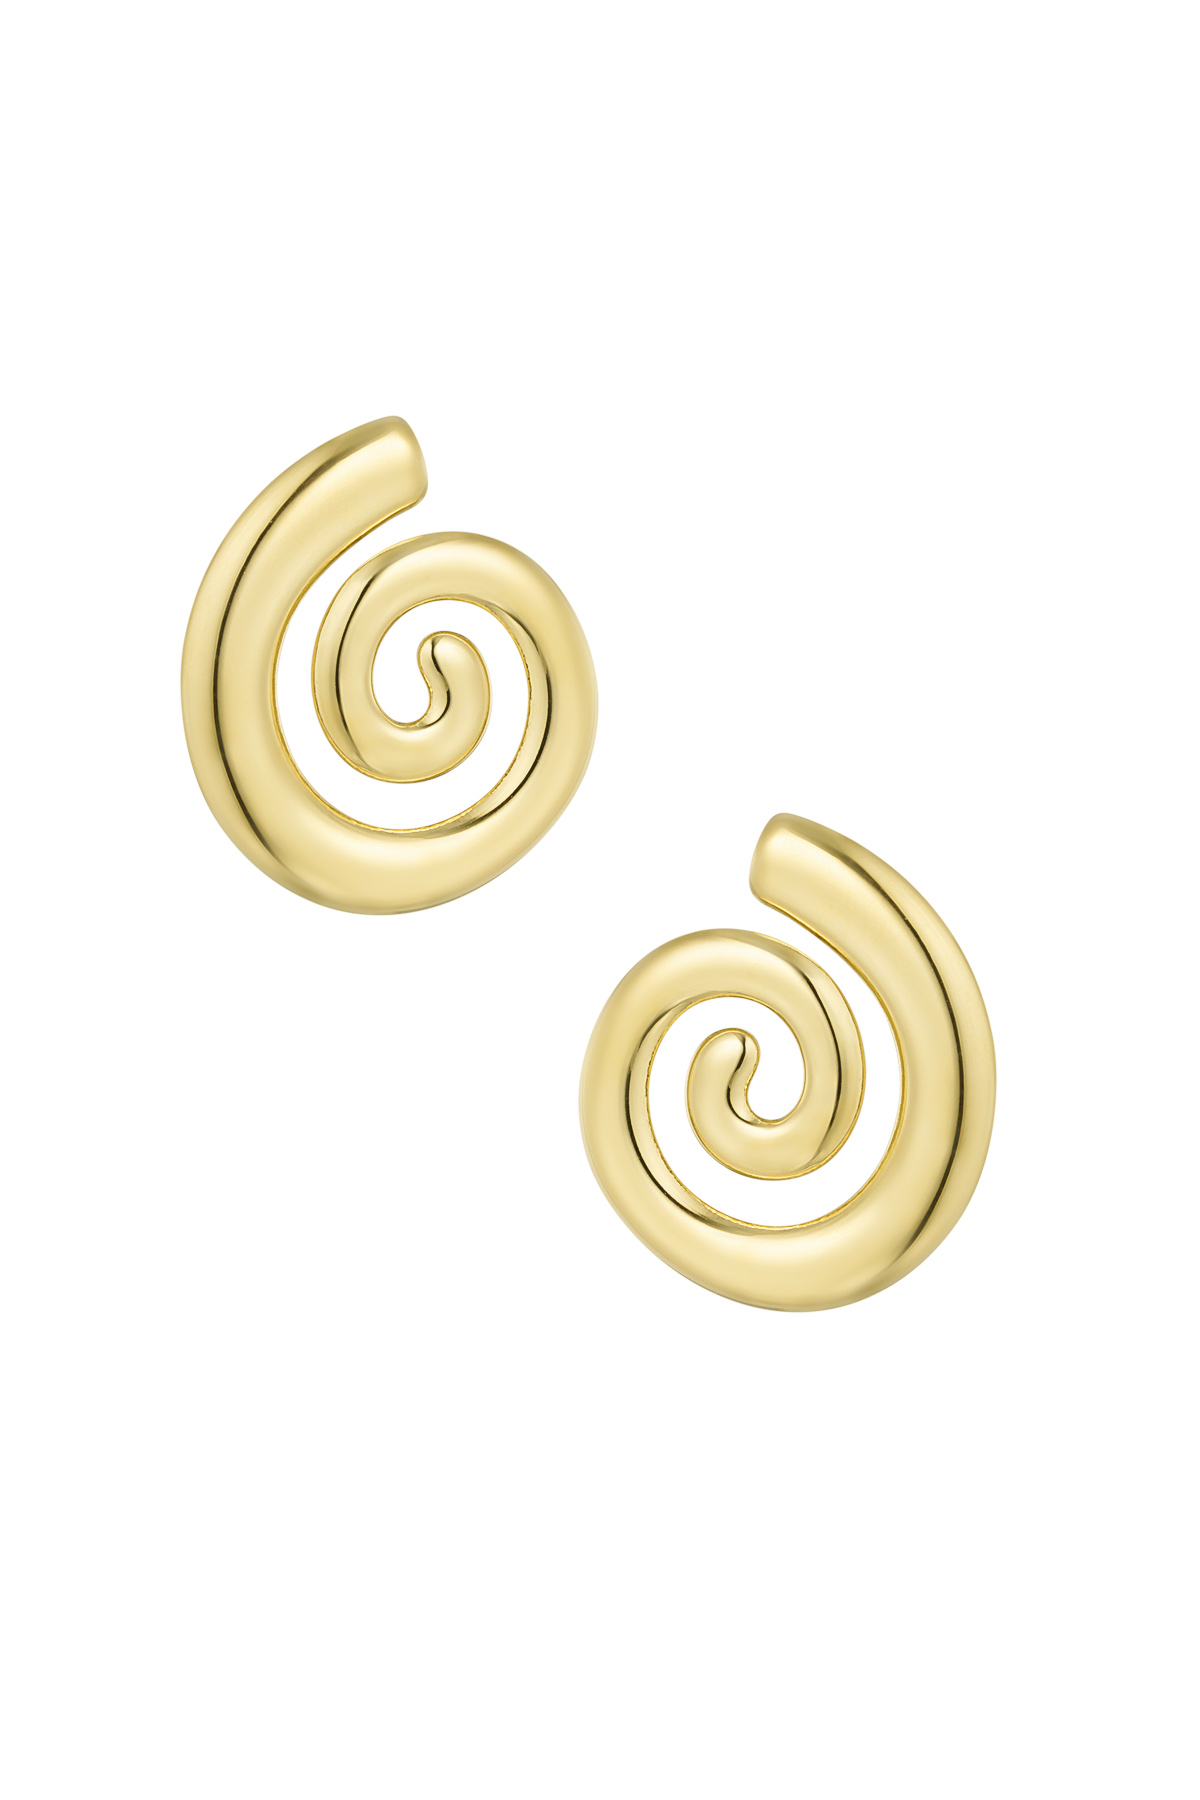 Earrings small swirly wave - gold h5 